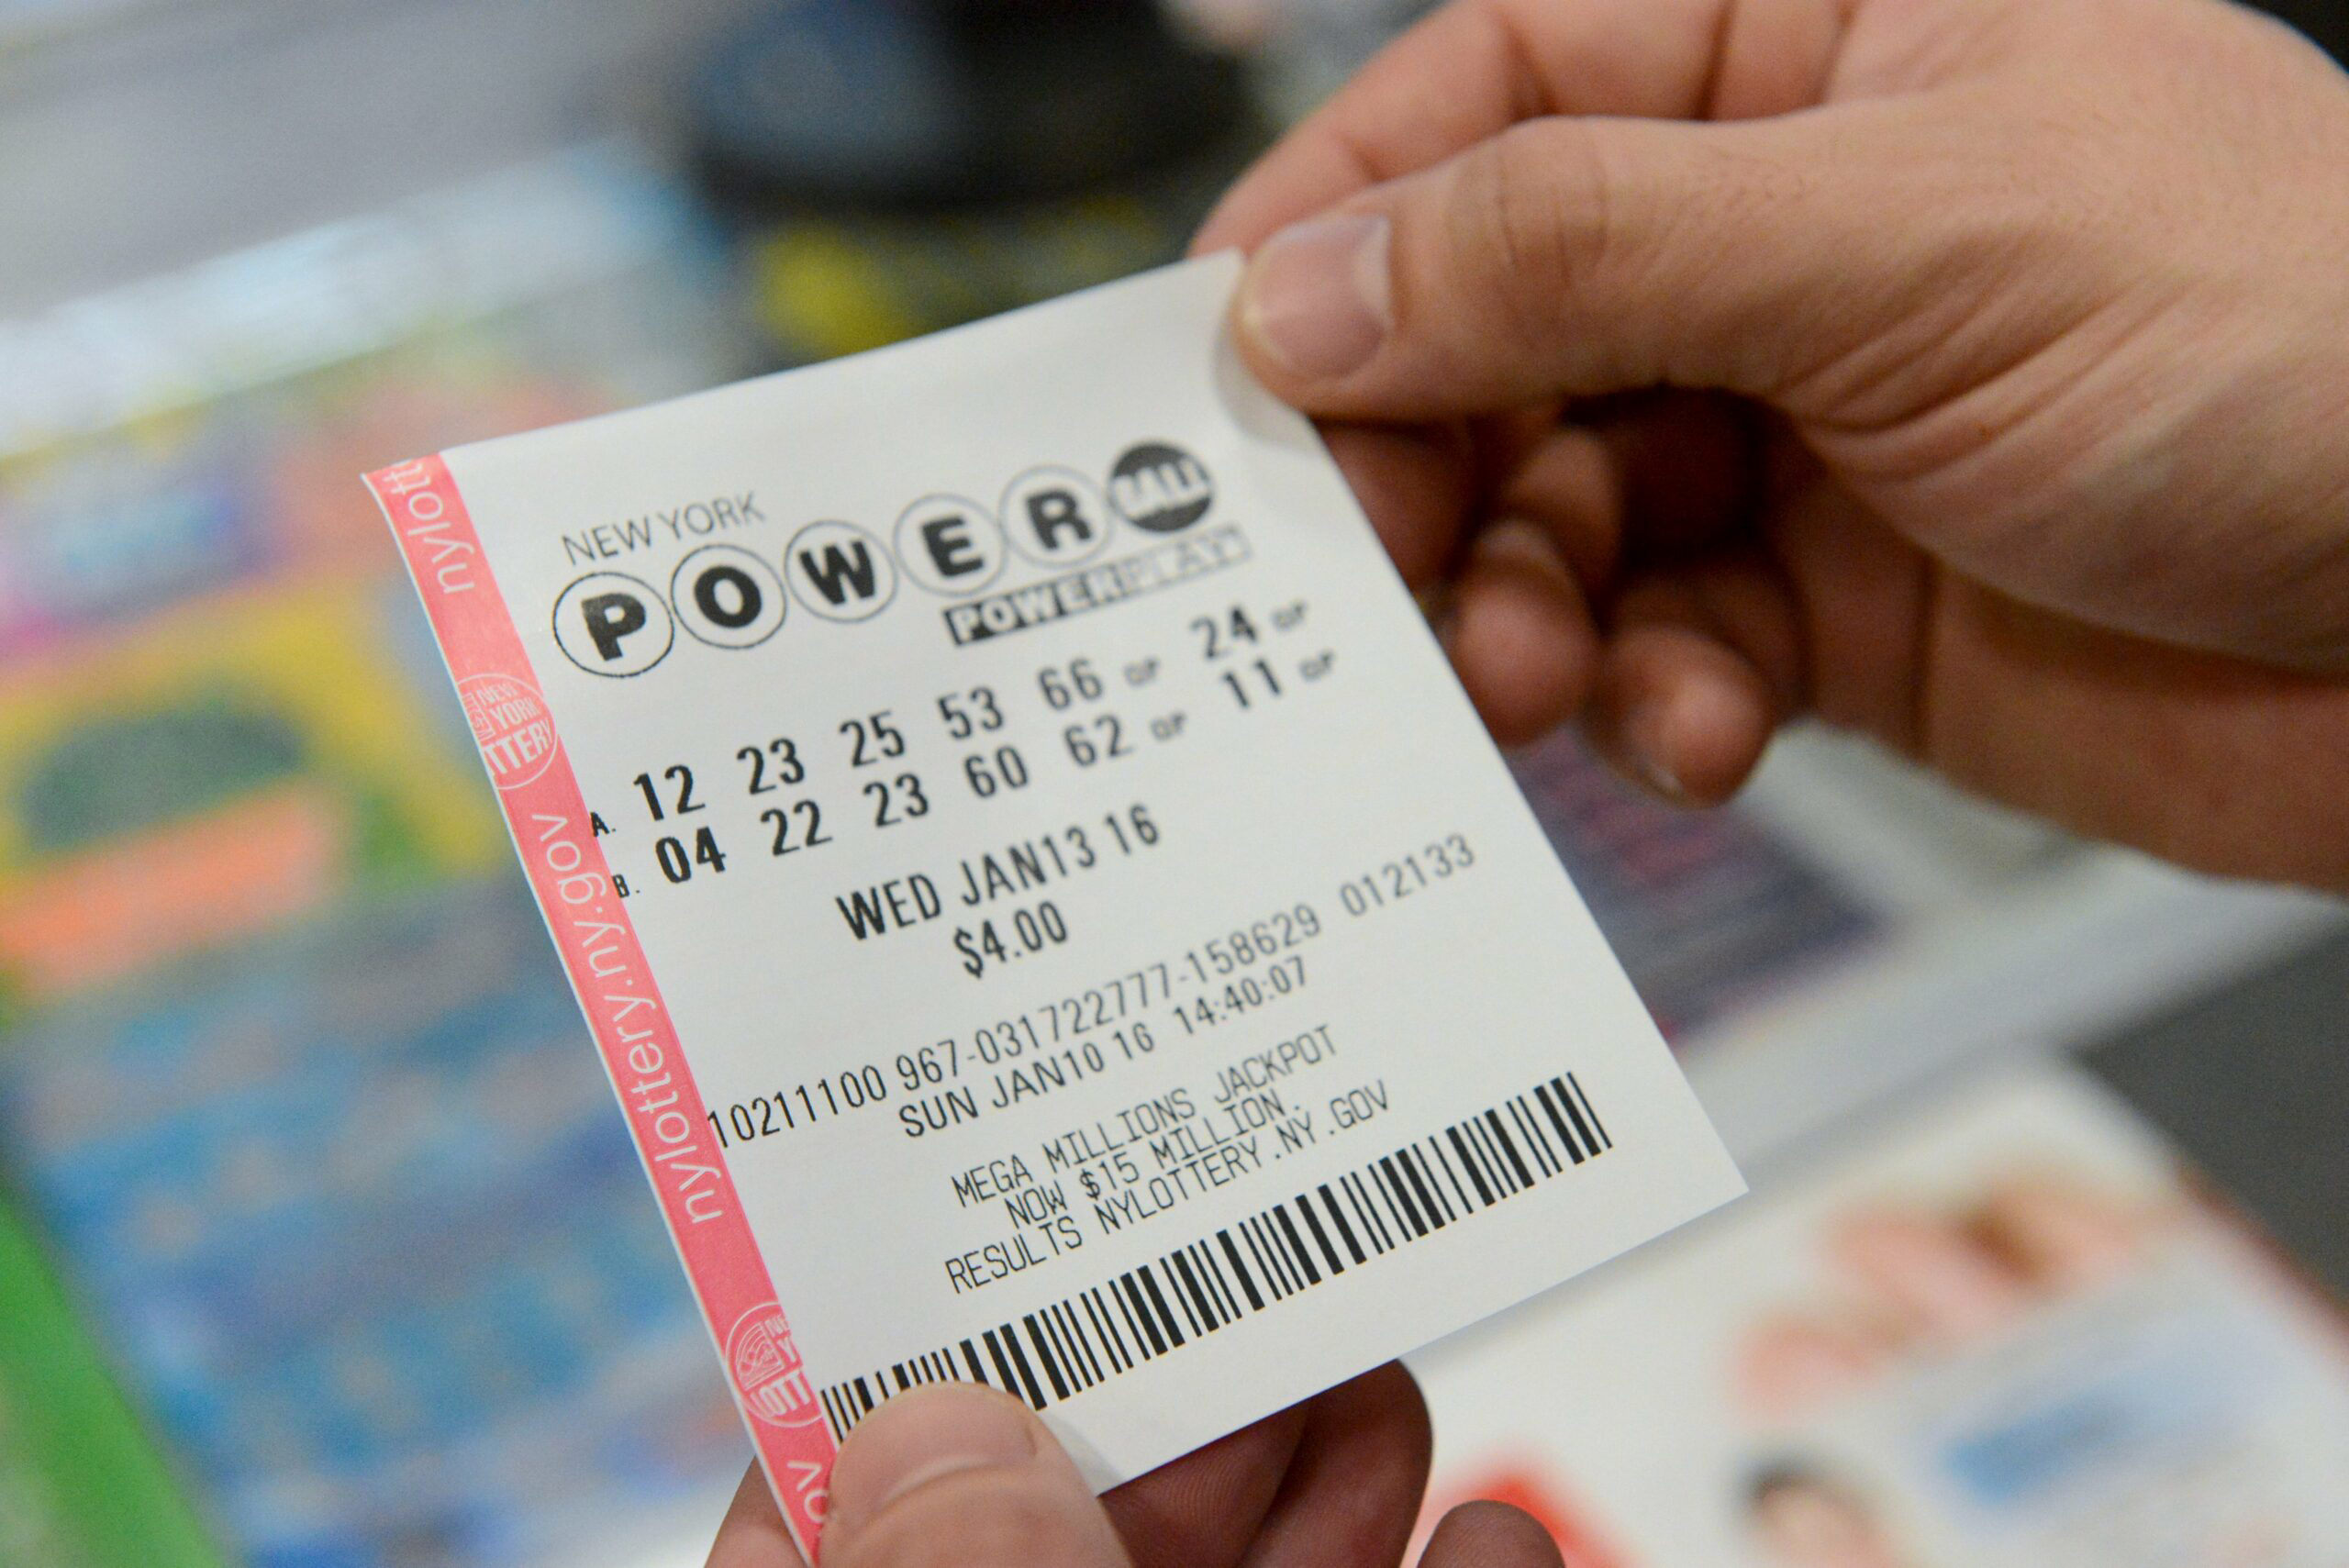 6 Winning Powerball lottery tickets sold in Saturday’s drawing